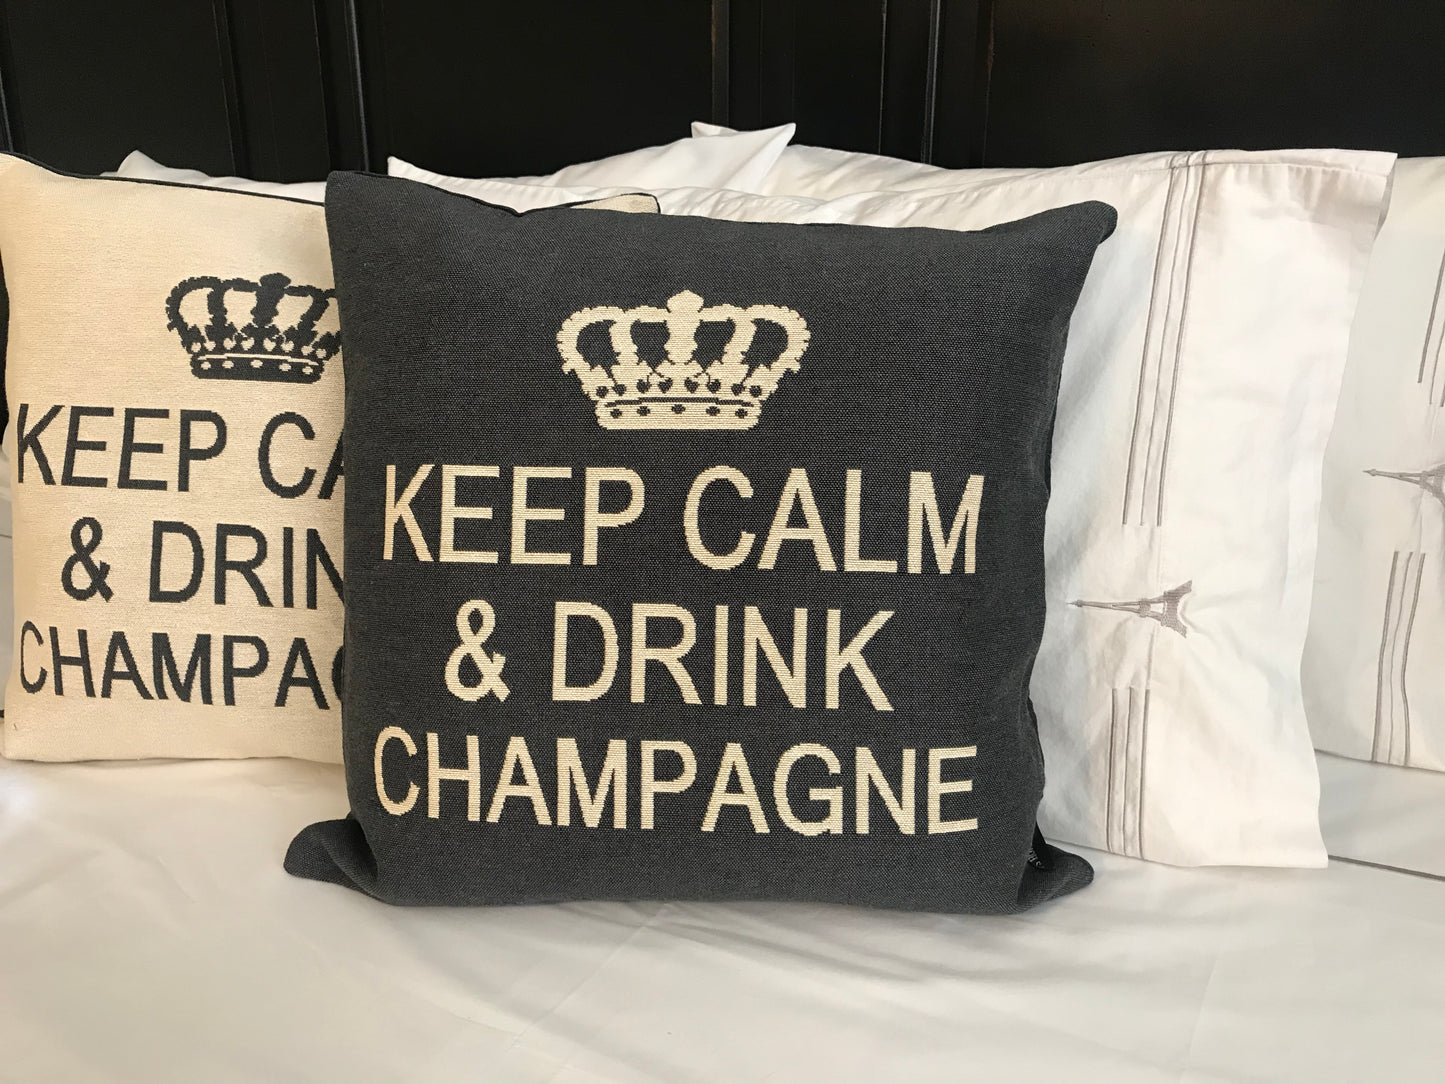 Keep Calm and Drink Champagne Decorative Pillow Cover - (Charcoal and Cream)